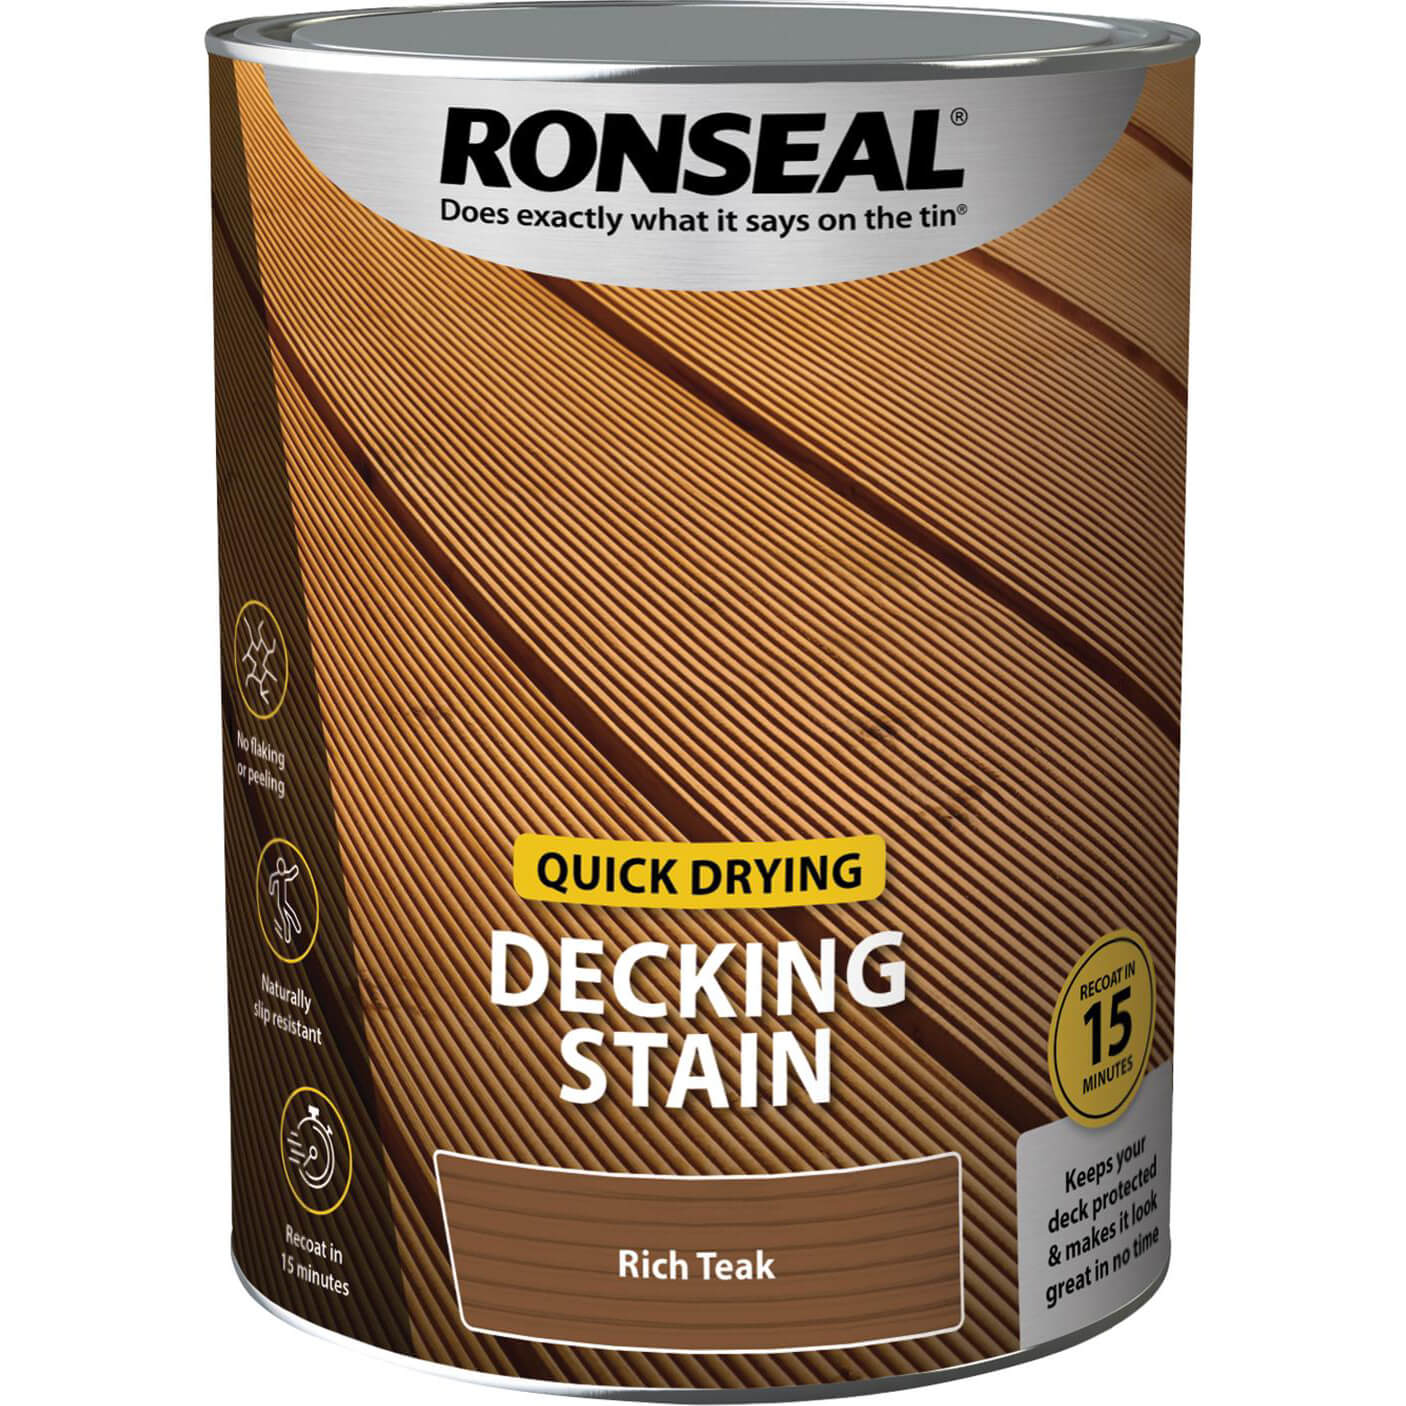 Ronseal Quick Drying Decking Stain 5l Rich Teak